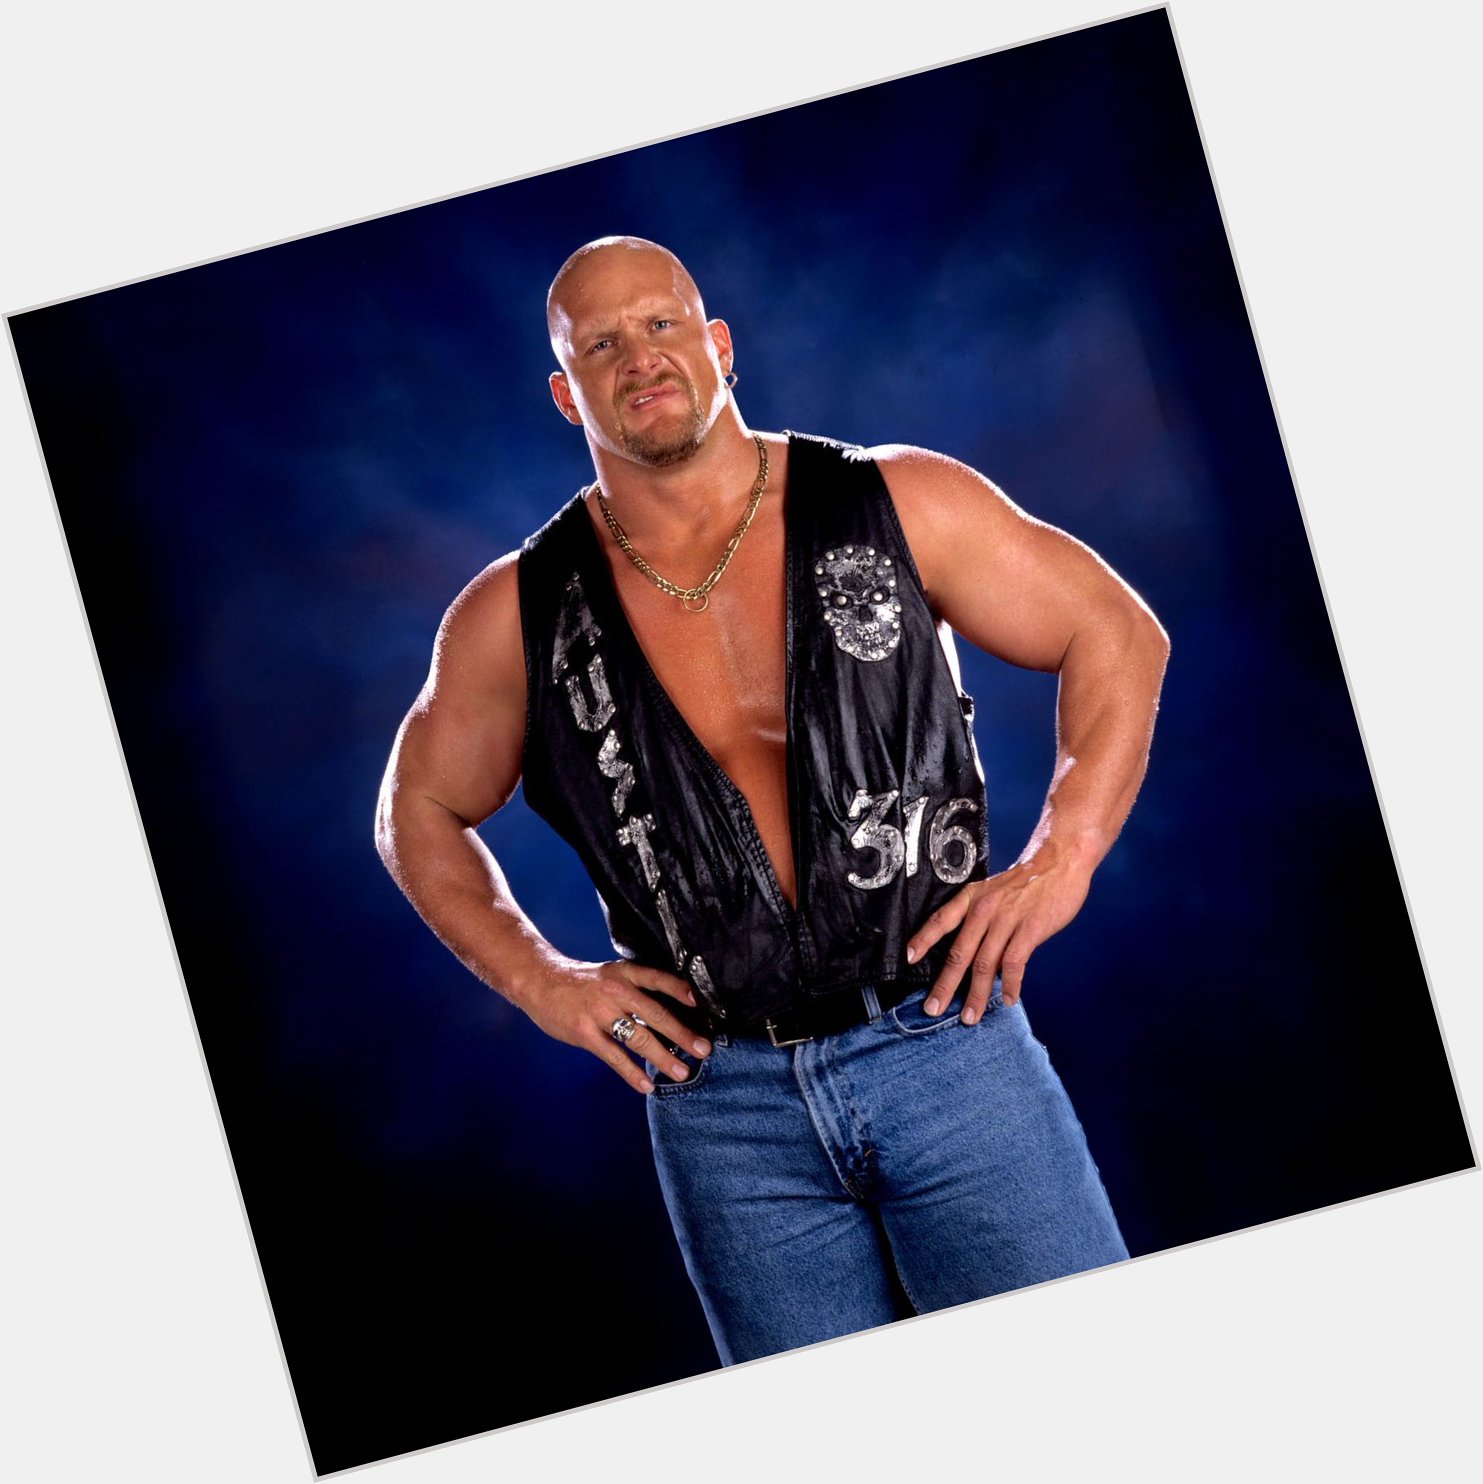 Happy Birthday to Stone Cold Steve Austin who turns 53 today! 